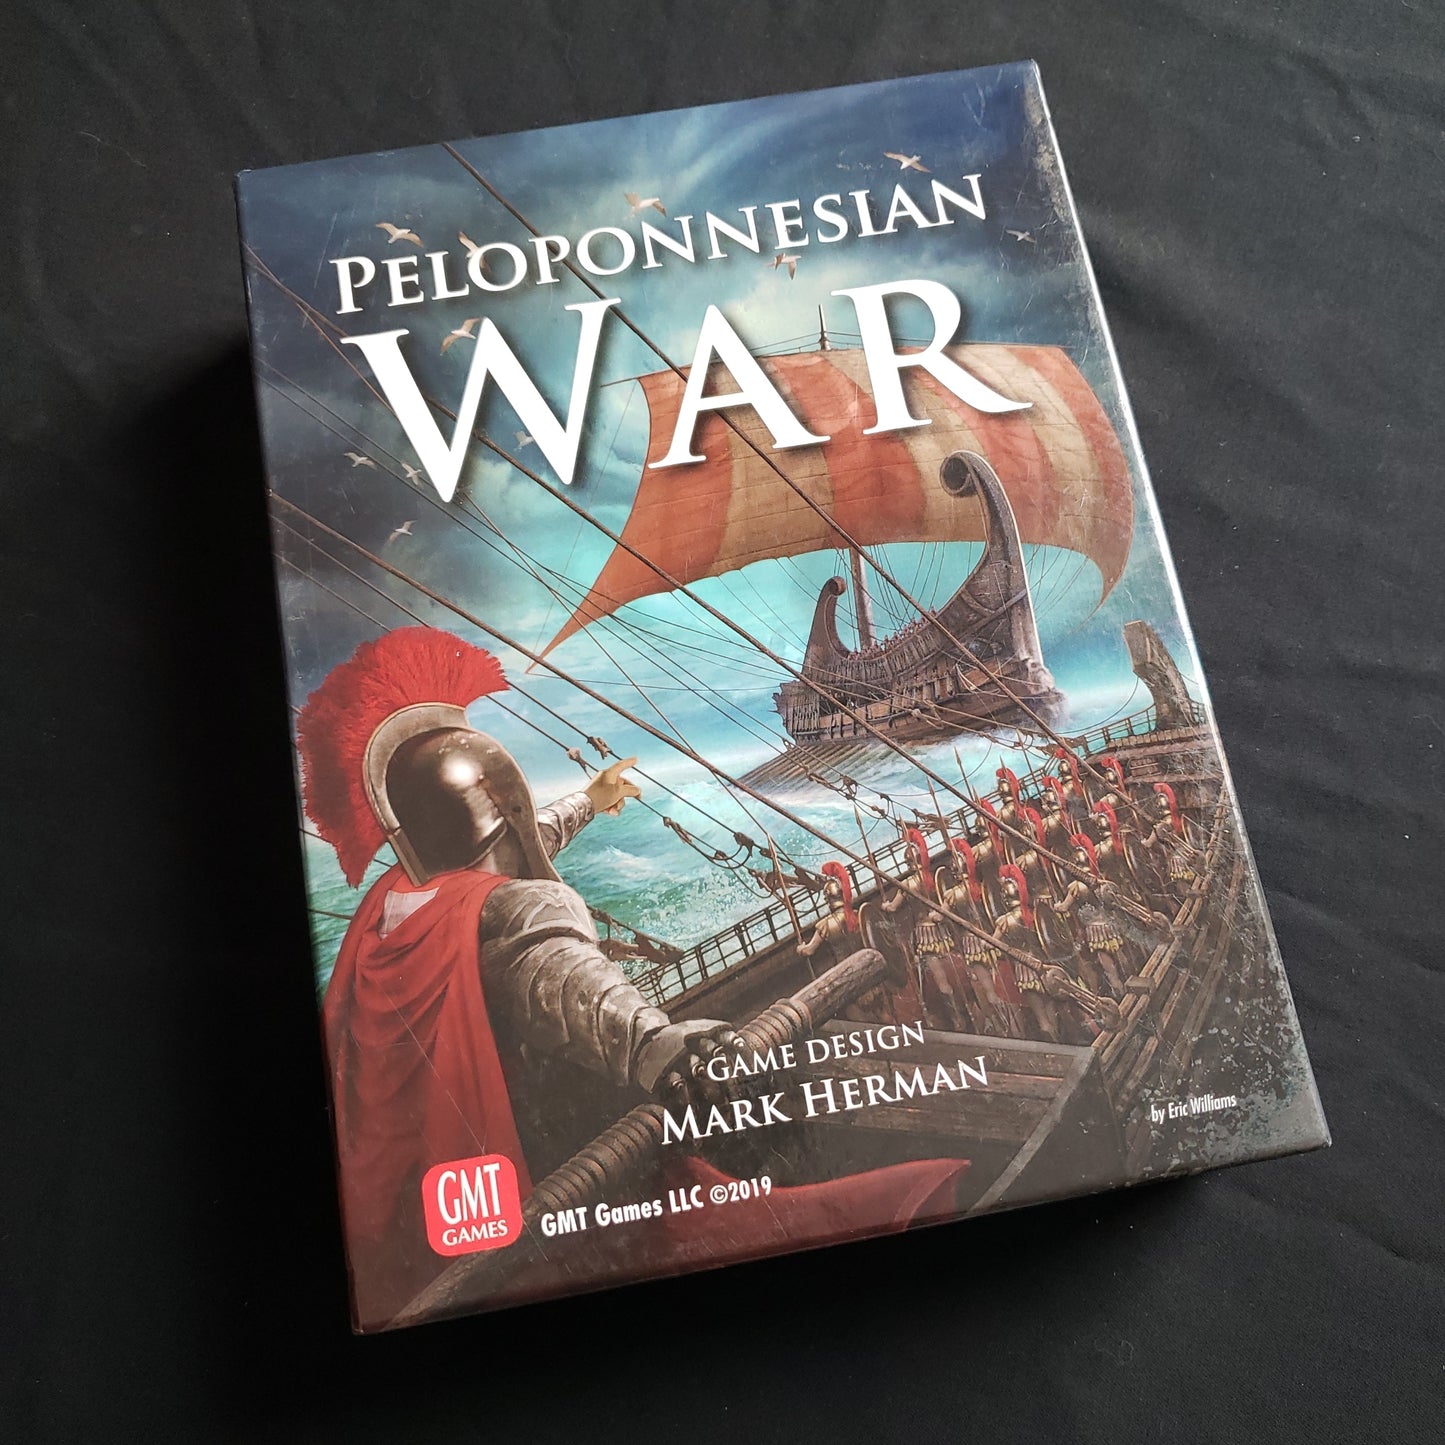 Image shows the front cover of the box of the Peloponnesian War board game